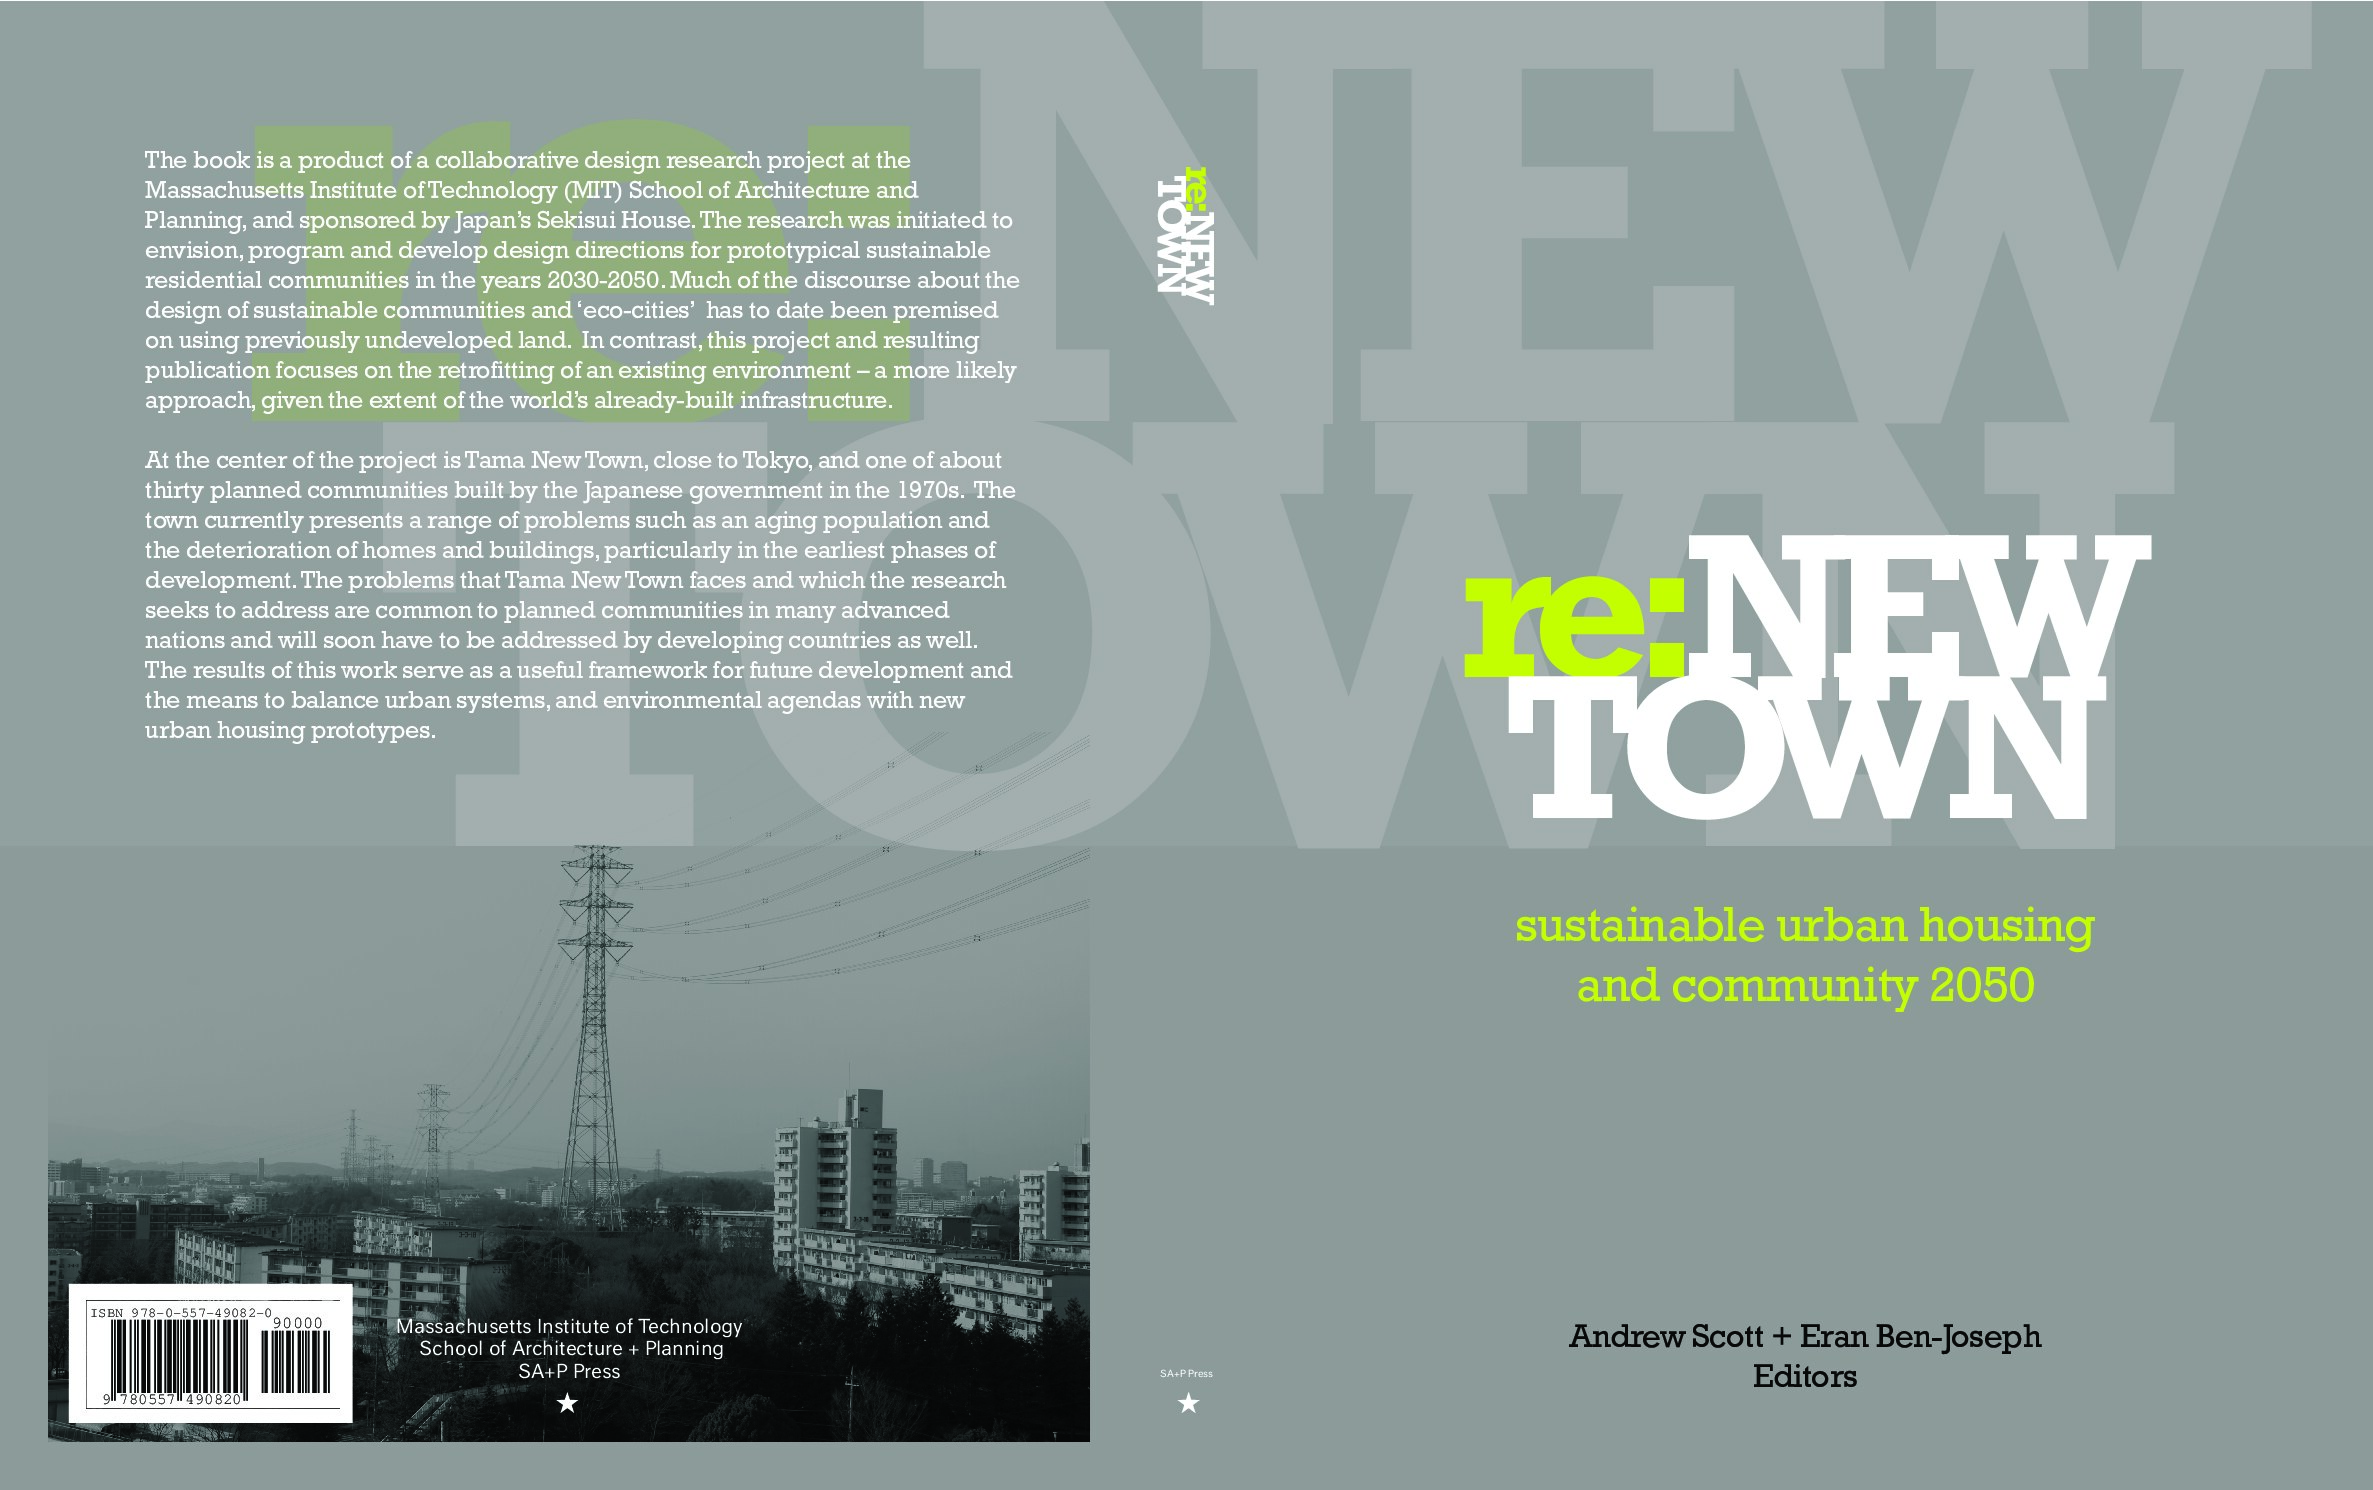 re-New Town - Sustainable Urban Housing & Community 2050